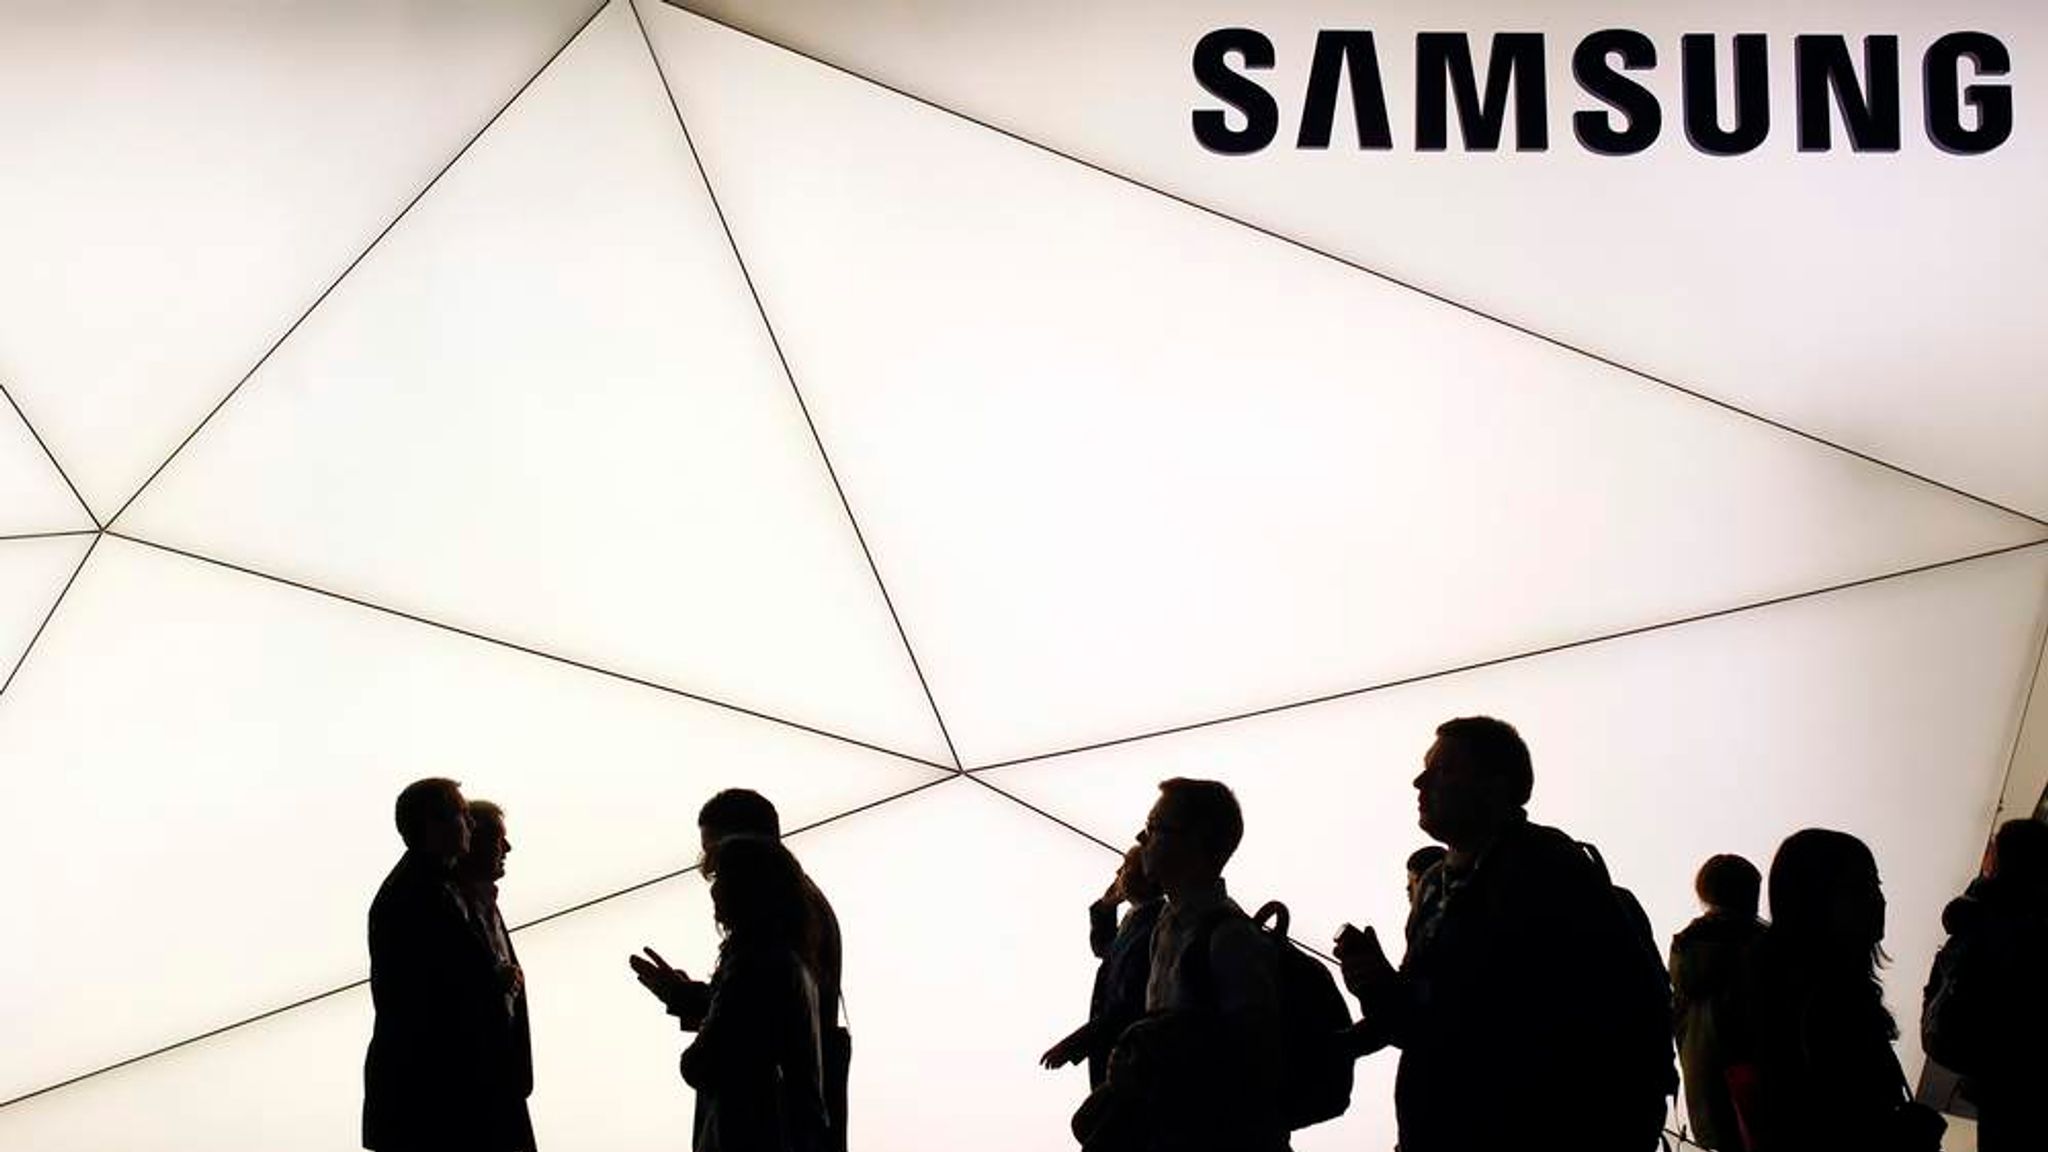 Samsung partners. Samsung workers.